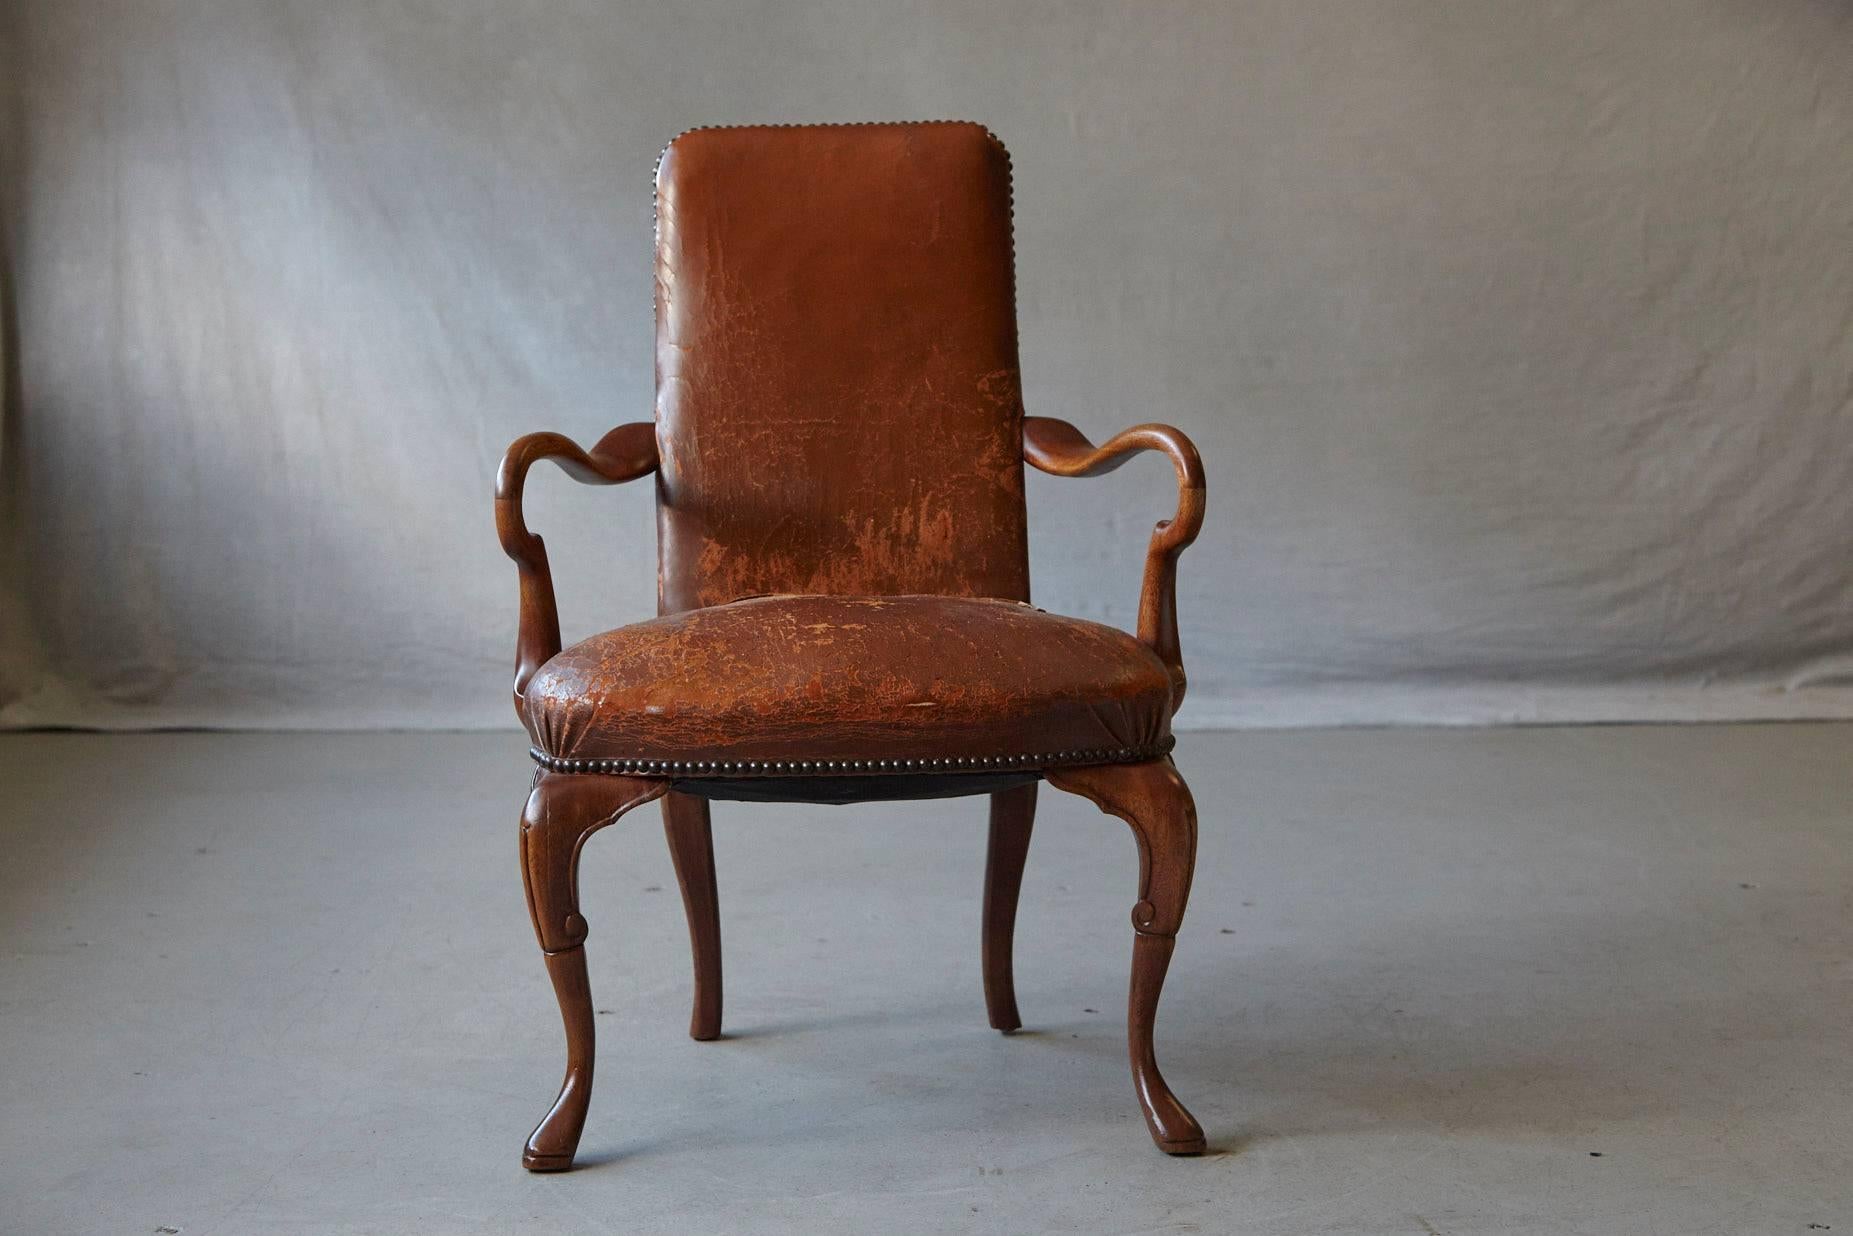 Lovely antique solid mahogany George III style desk armchair, with distressed worn hand dyed leather upholstery, nailhead trim and shaped arms. The chair is raised on cabriole legs with carved knees. 
The chair is in very good solid condition and